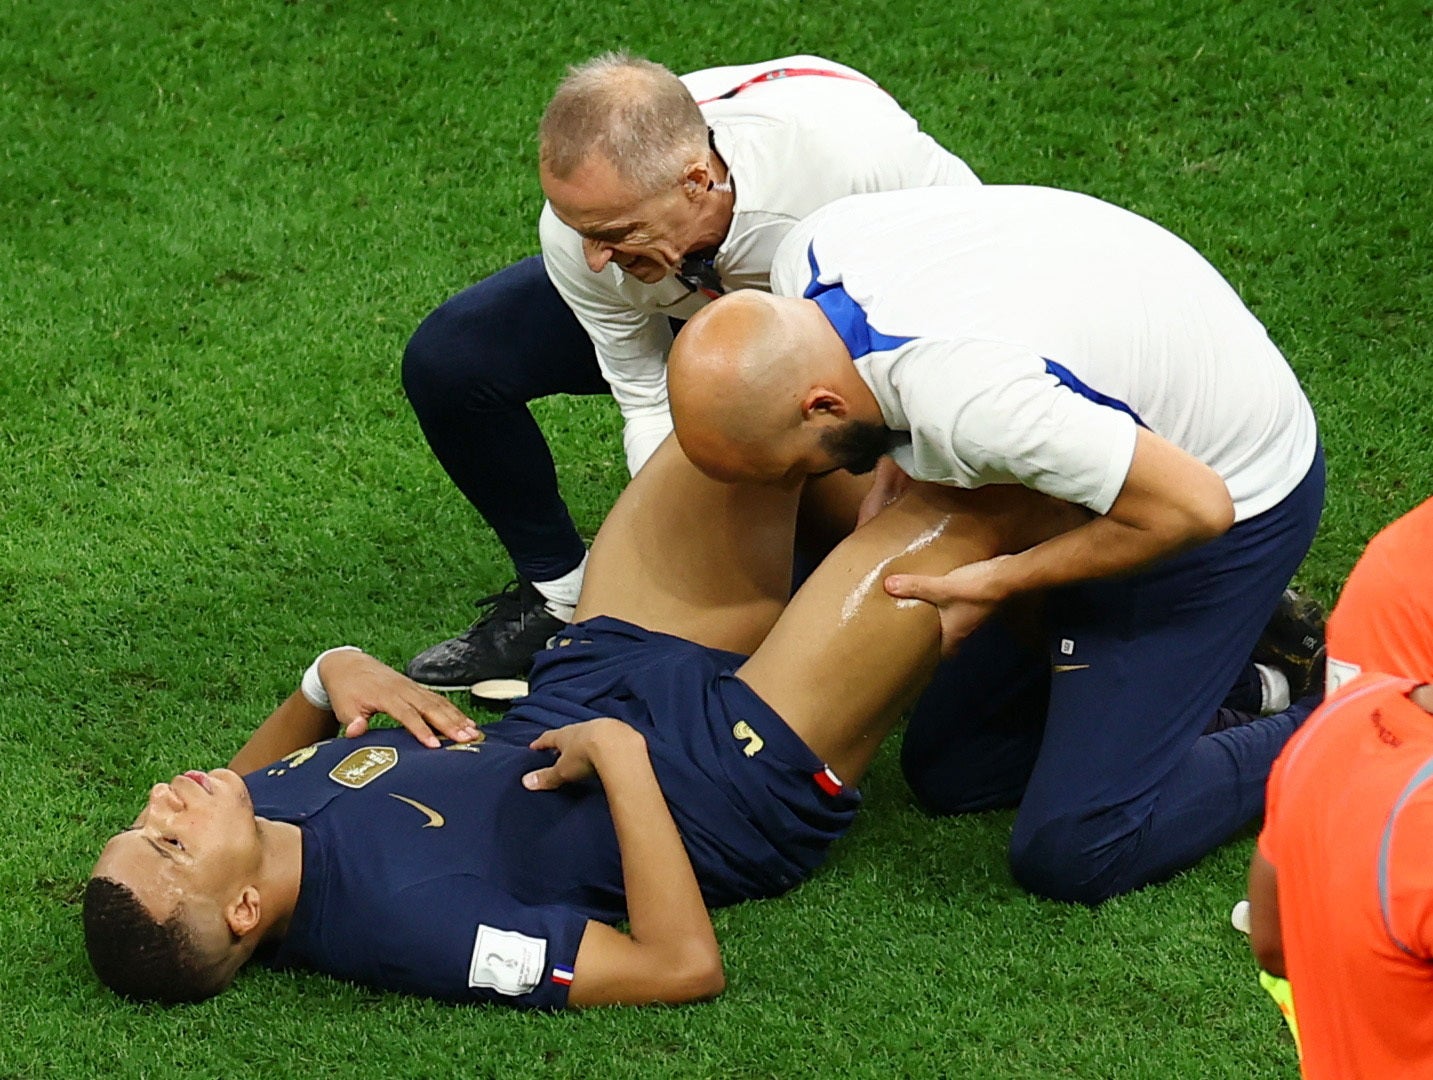 Kylian Mbappe receives medical attention before extra time